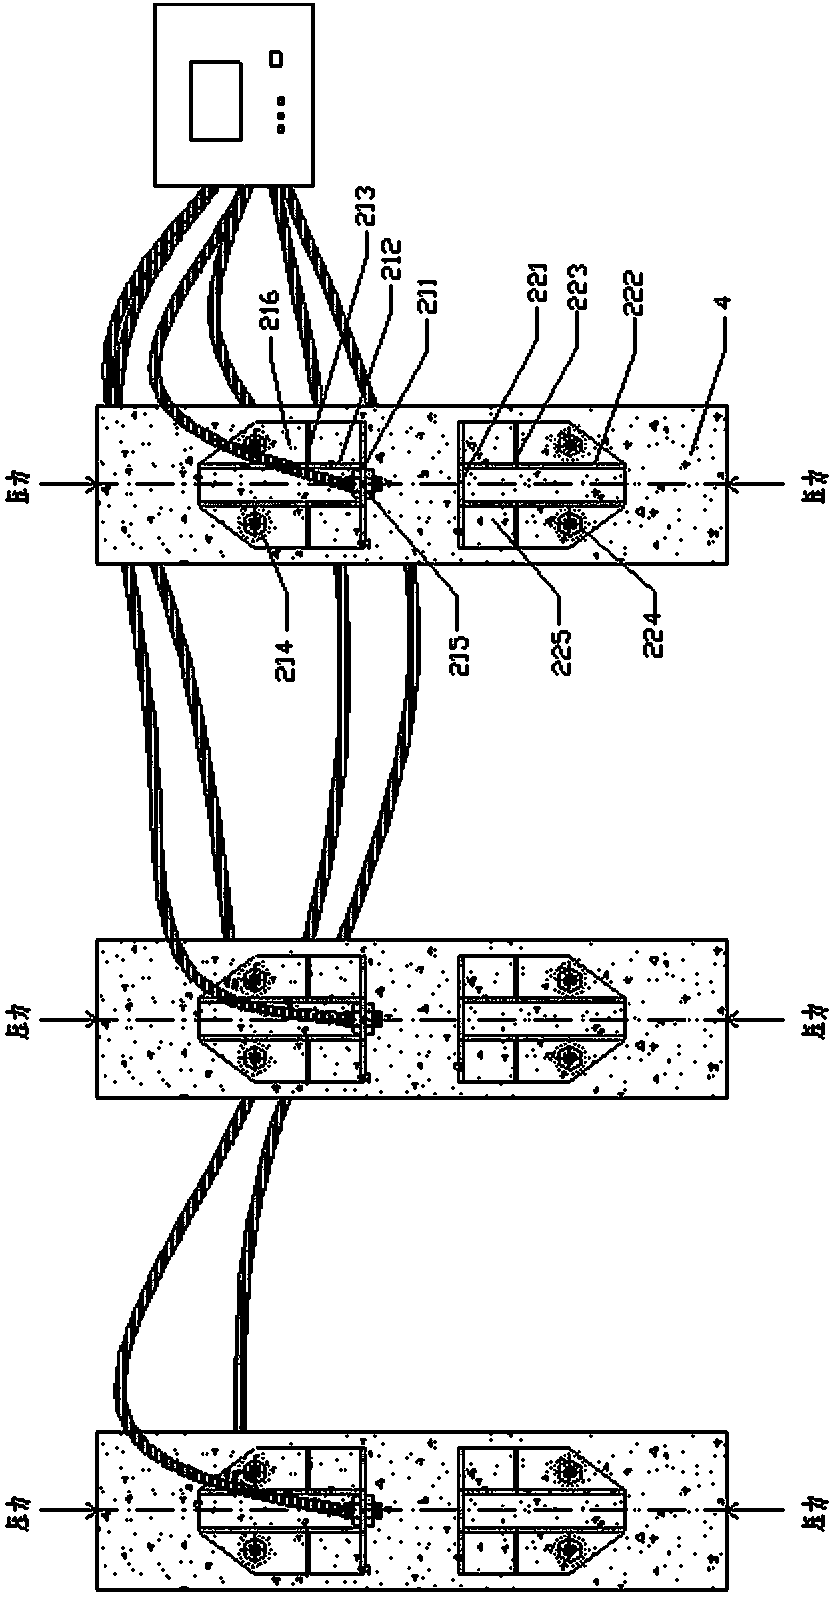 Device for measuring creep deformation of eddy current